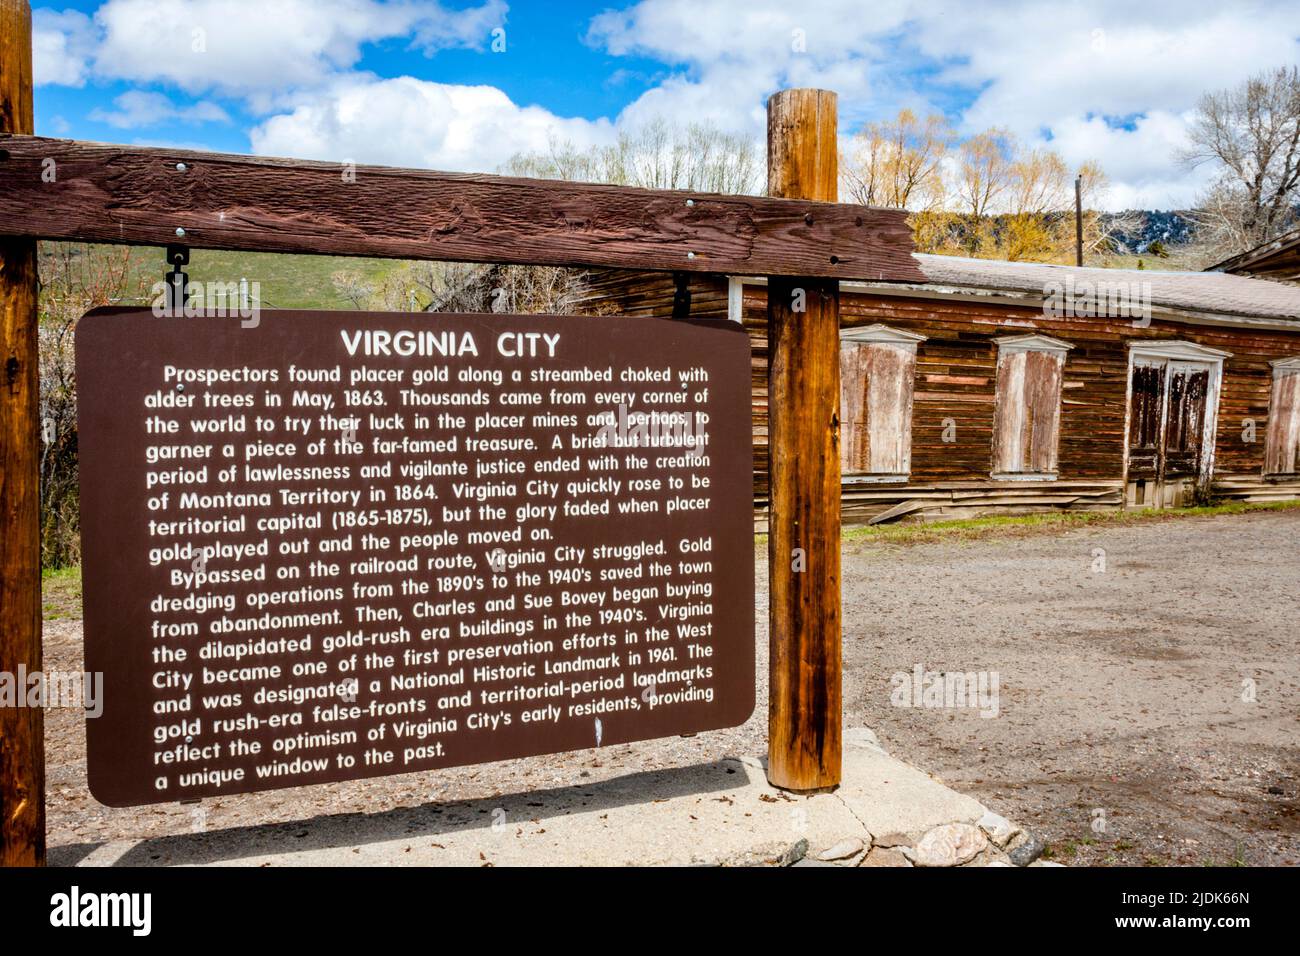 Virginia City tourist attraction has a large hanging wooden sign giving the history of the area from gold rush times. Stock Photo